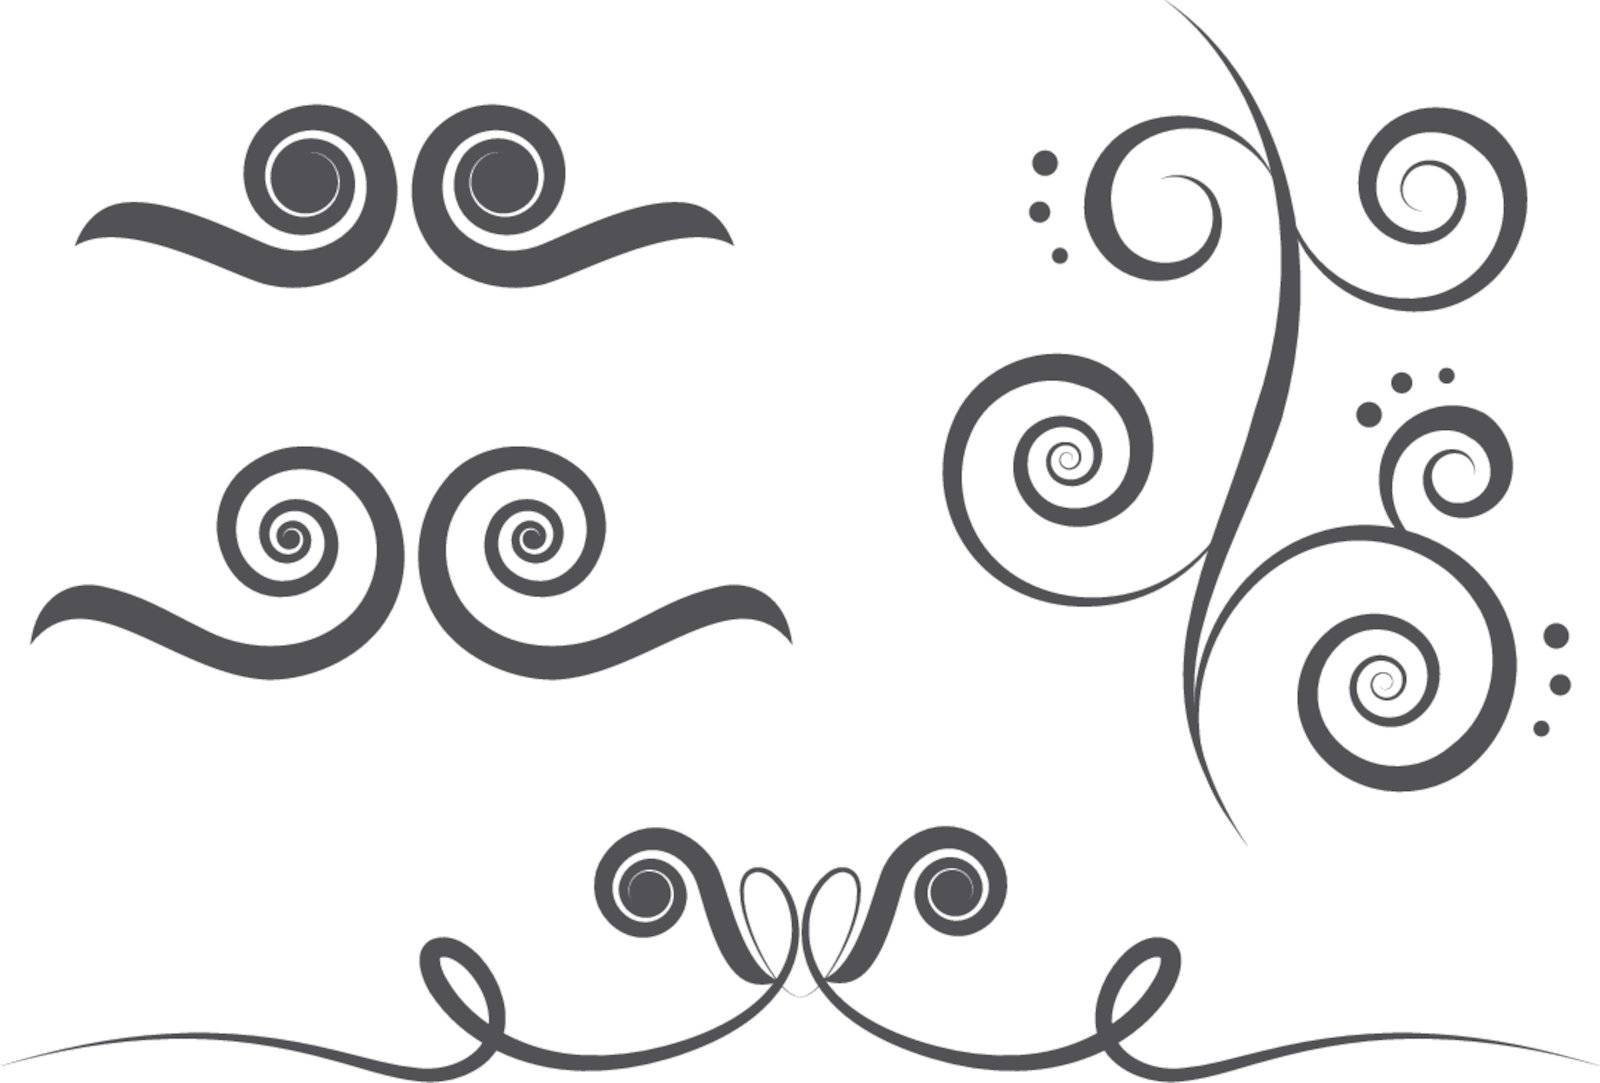 Swirl art elements for design and decorate isolated on the white background